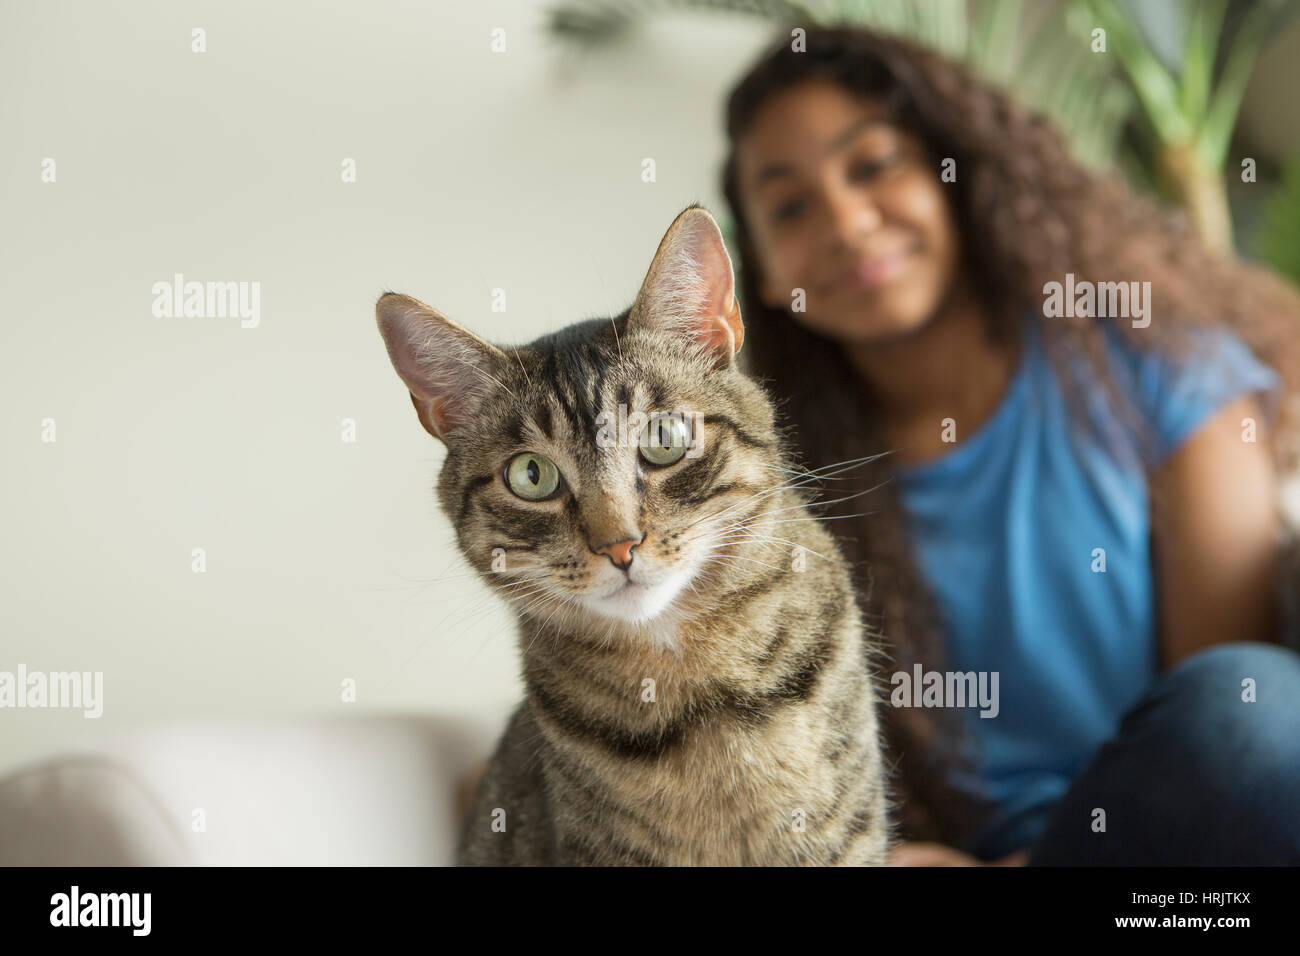 A girl sitting on a sofa with a pet cat. Stock Photo